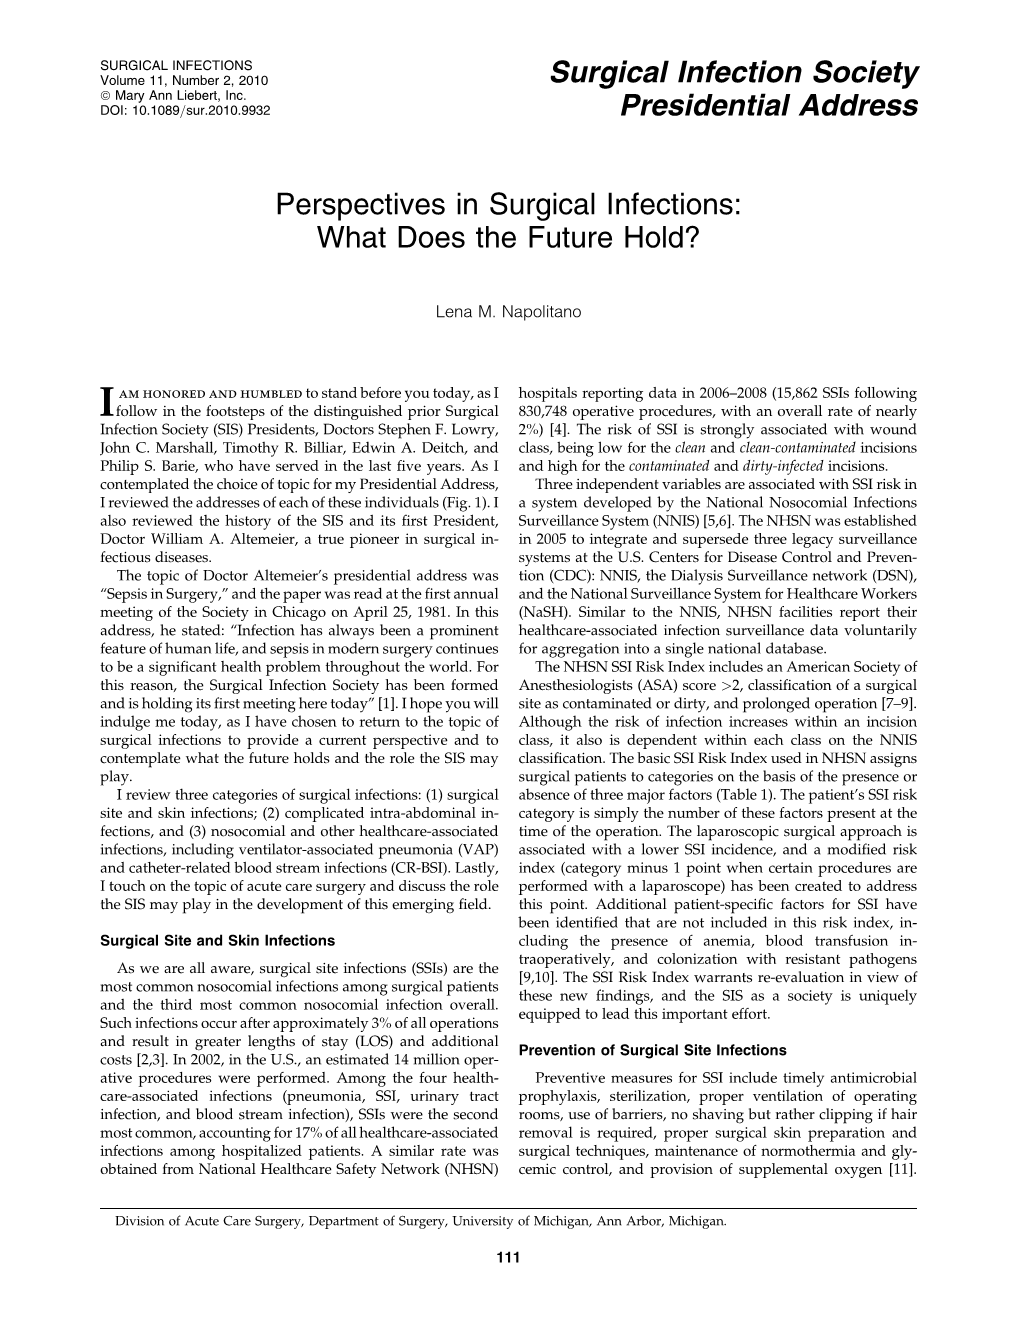 Perspectives in Surgical Infections: What Does the Future Hold?